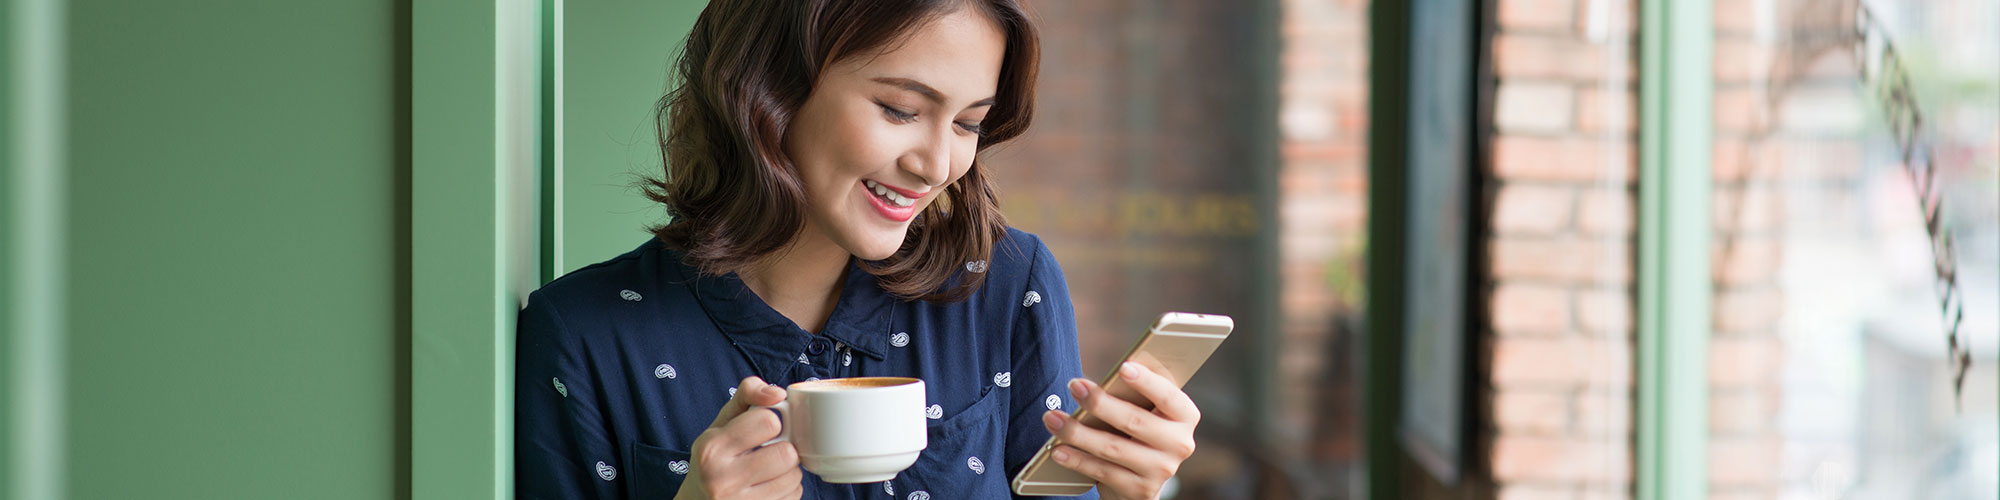 smiling woman looking a smartphone